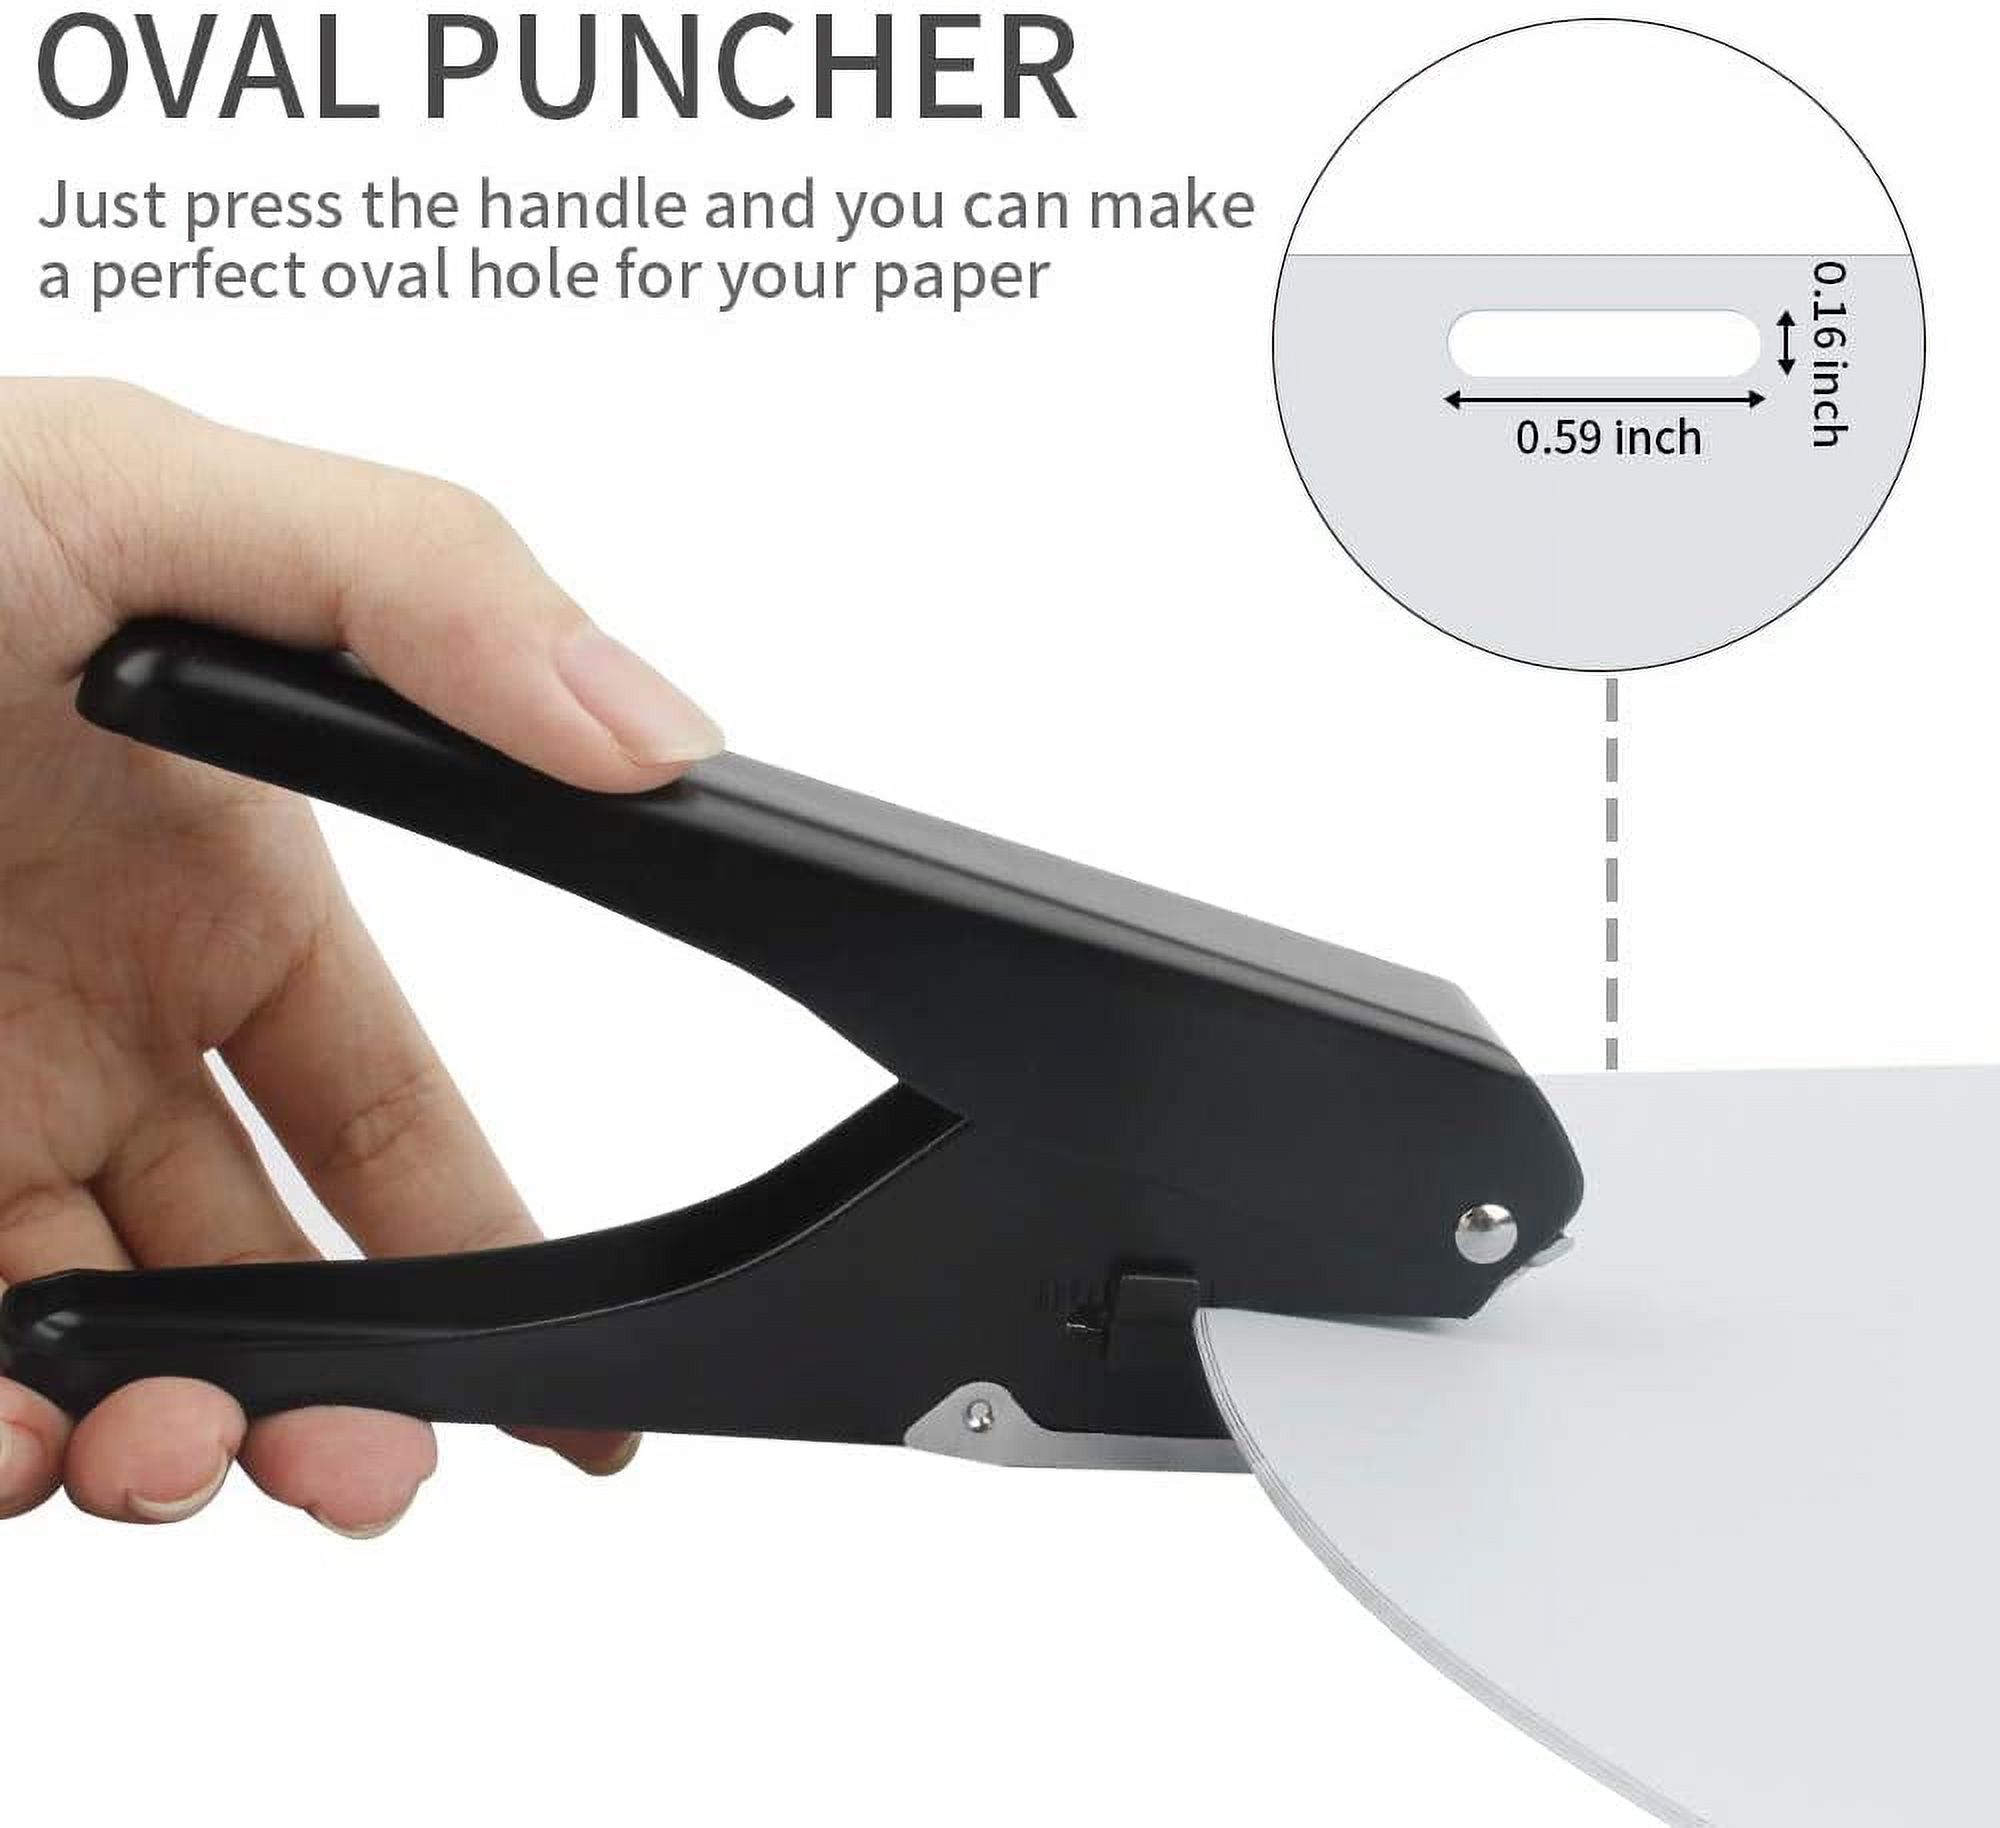 Heavy-Duty Elliptical Punch - Badge Hole Punch for ID Cards, PVC Slots, and  Paper 